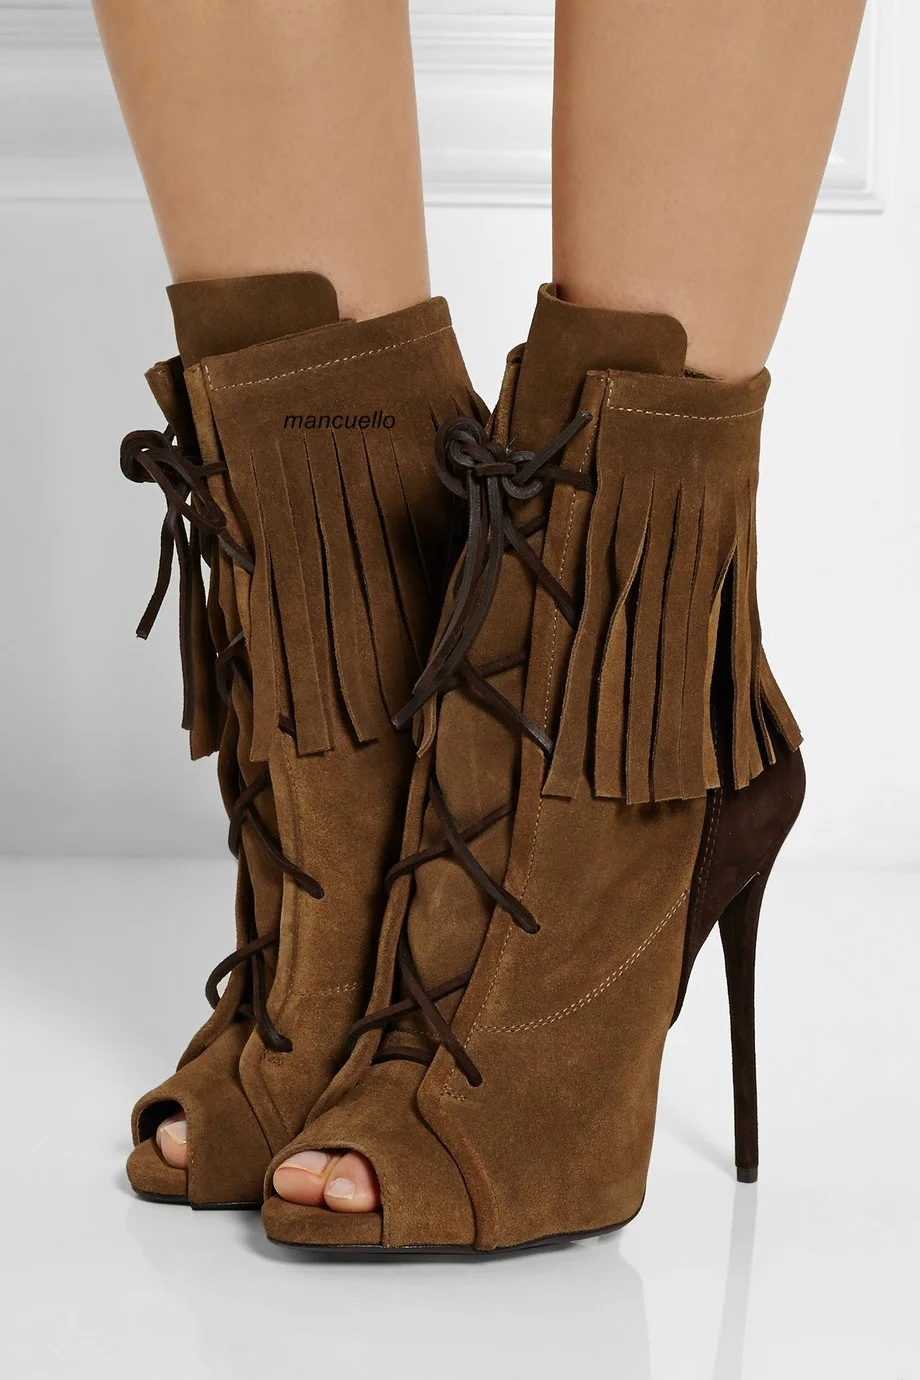 

New Arrival Brown Suede Patchwork Fringe Lace Up Ankle Boots Women Fancy Peep Toe Tassel Stiletto High Heel Sandal Booties